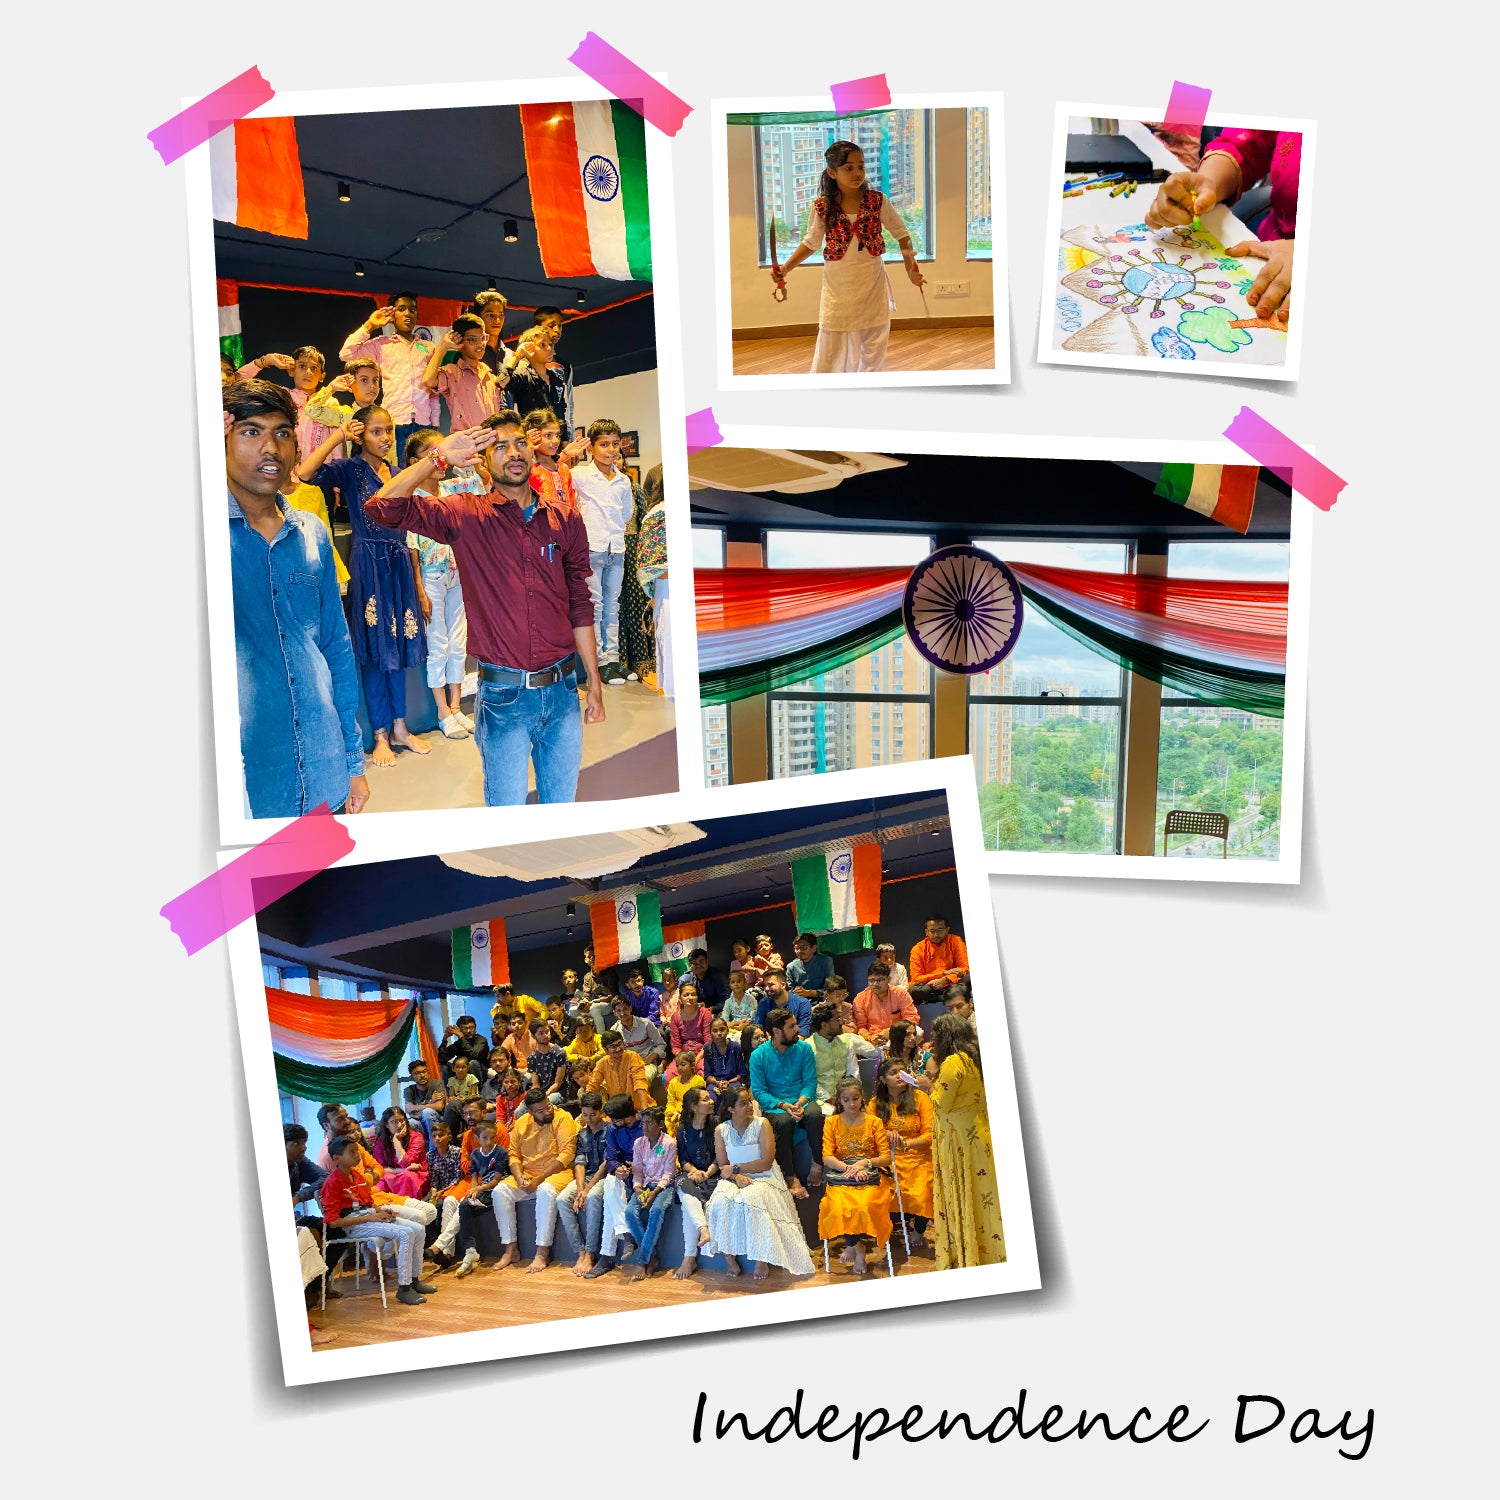 Independence Day celebration at Lucent Innovation